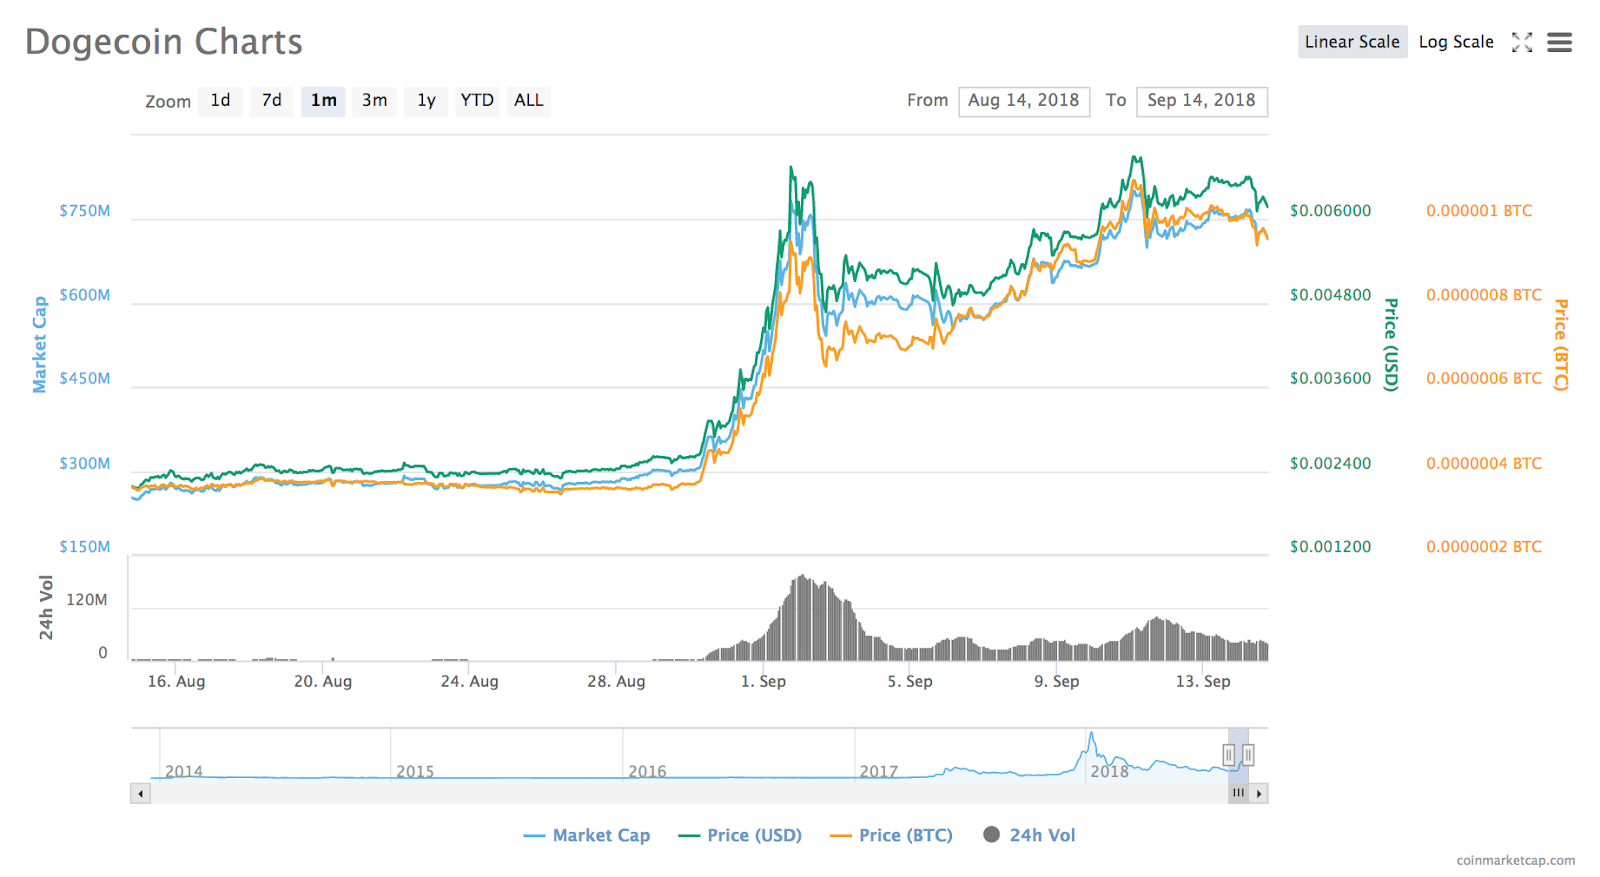 Dogecoin 1-month price chart